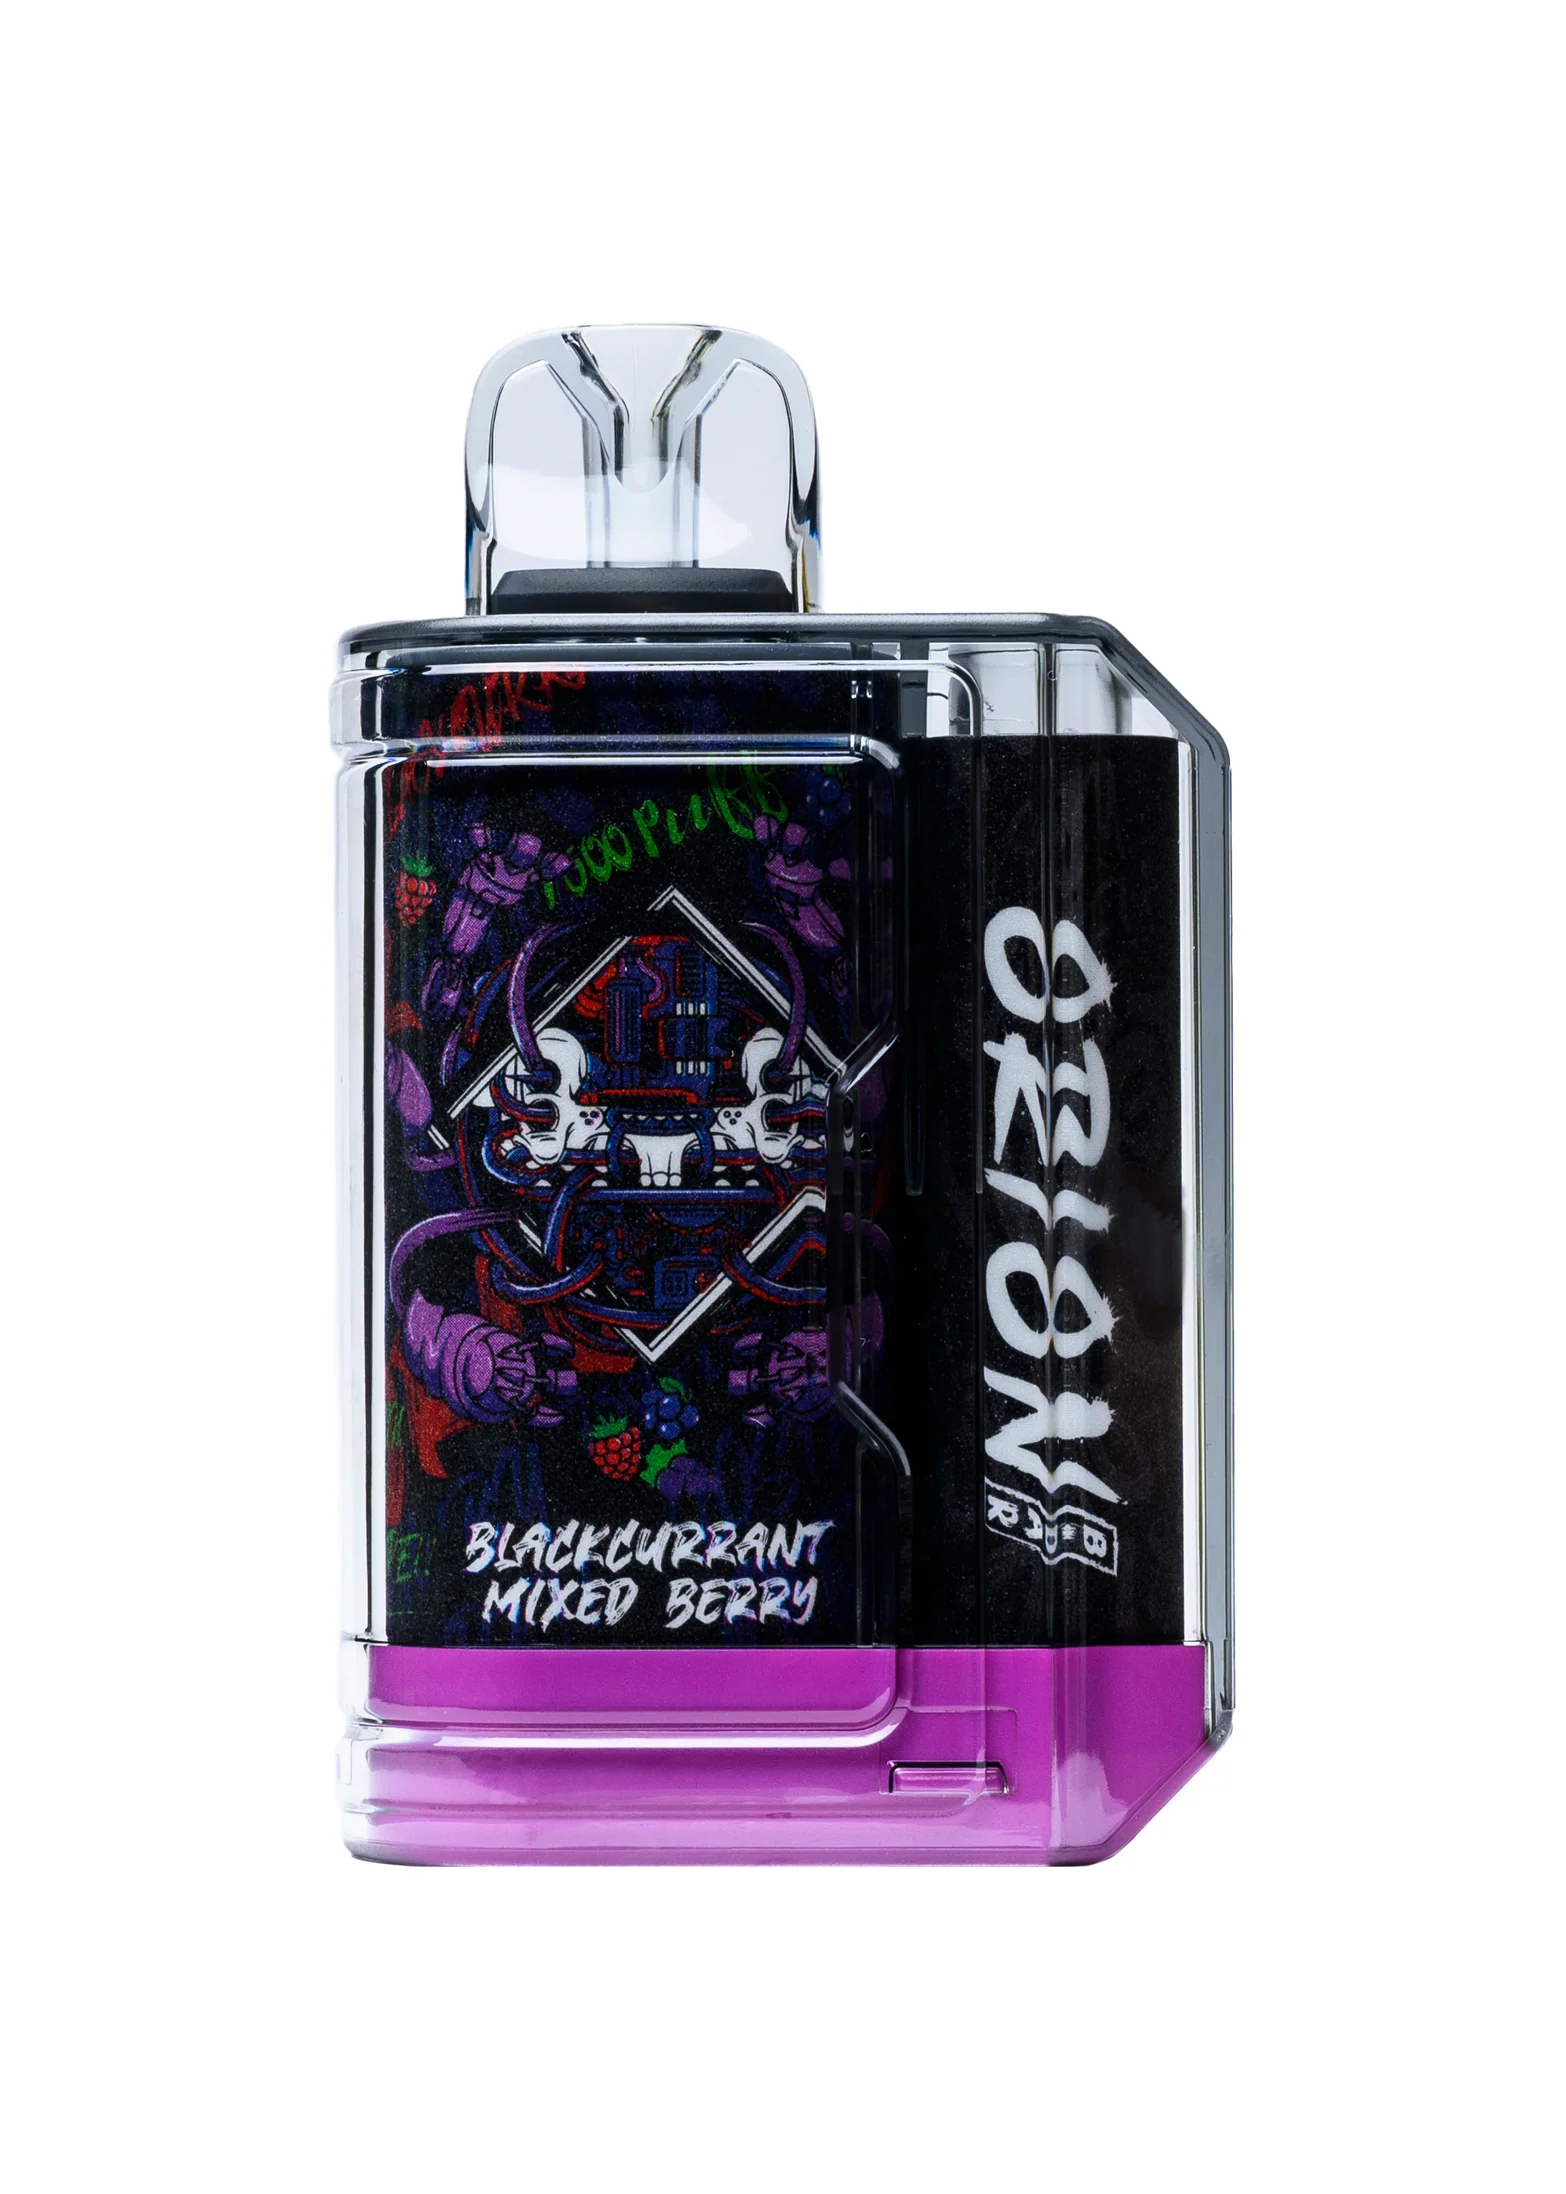 Blackcurrant Mixed Berries Orion Bar 7500